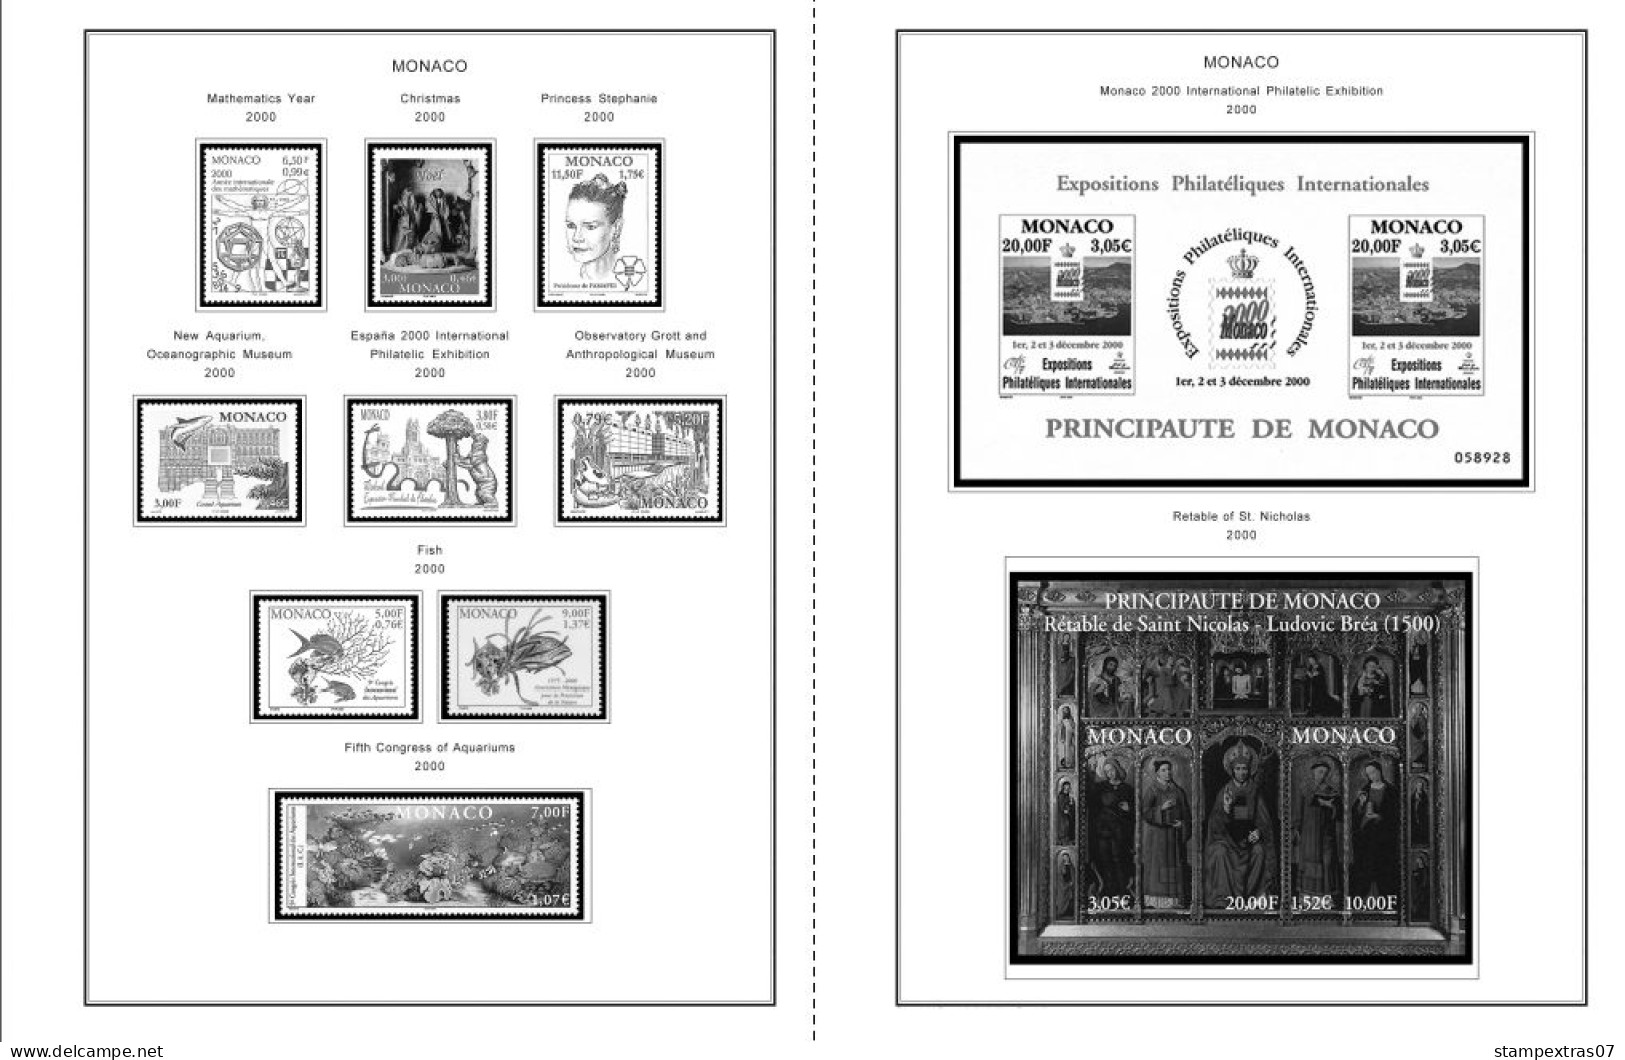 MONACO 1855-2010 + 2011-2020 STAMP ALBUM PAGES (409 B&w Illustrated Pages) - Inglese